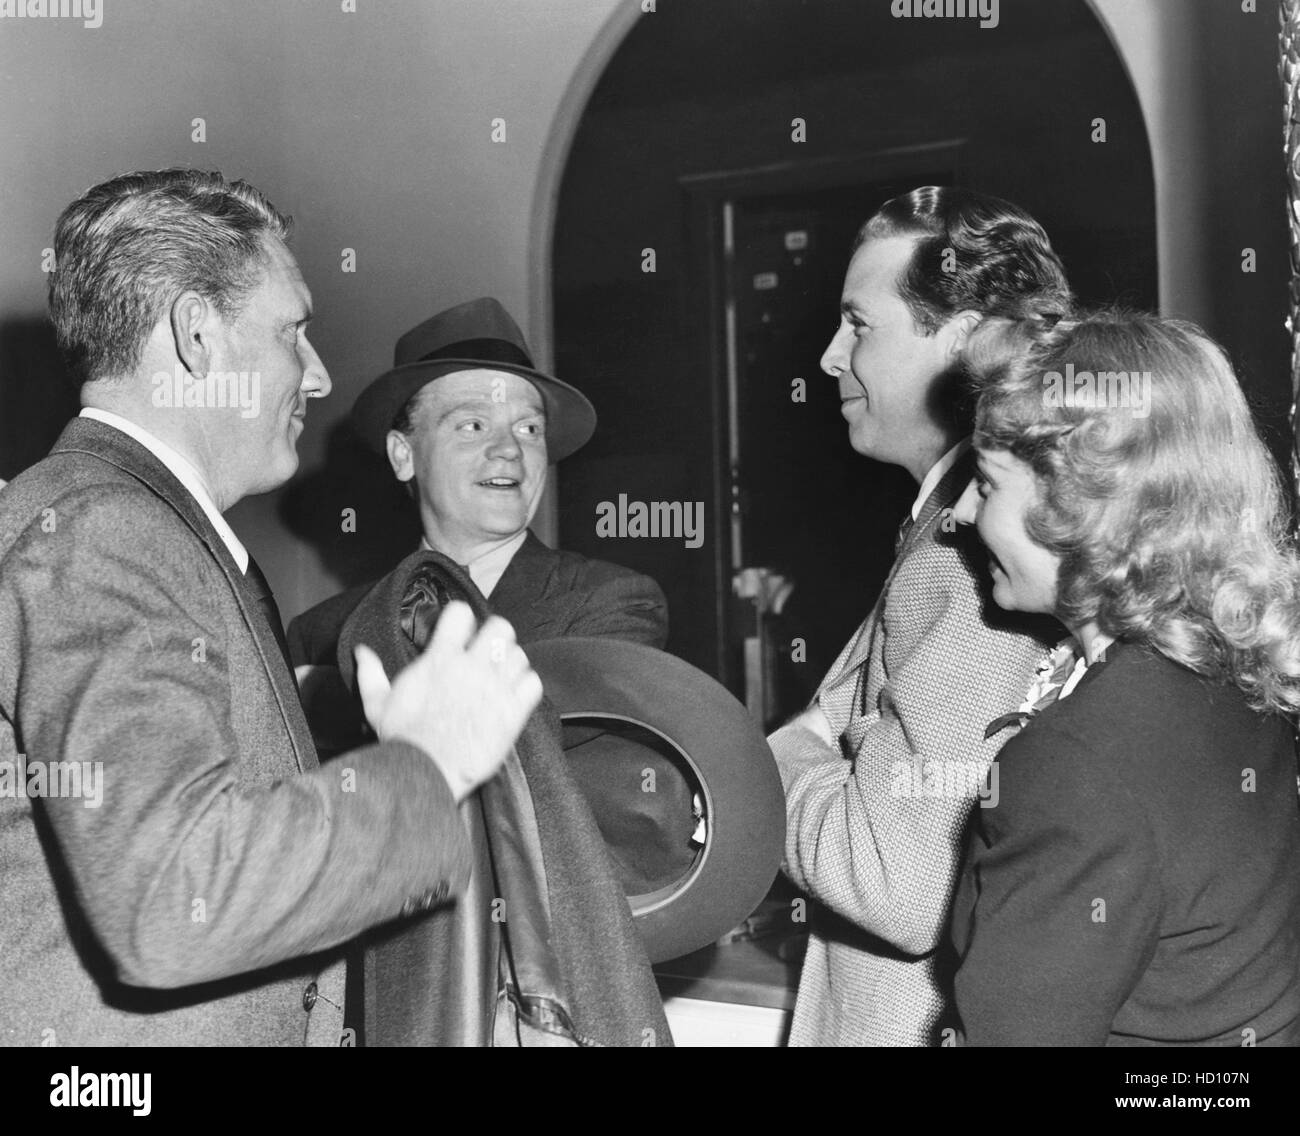 From left: Spencer Tracy, James Cagney, Dick Powell, Joan Blondellat a ...